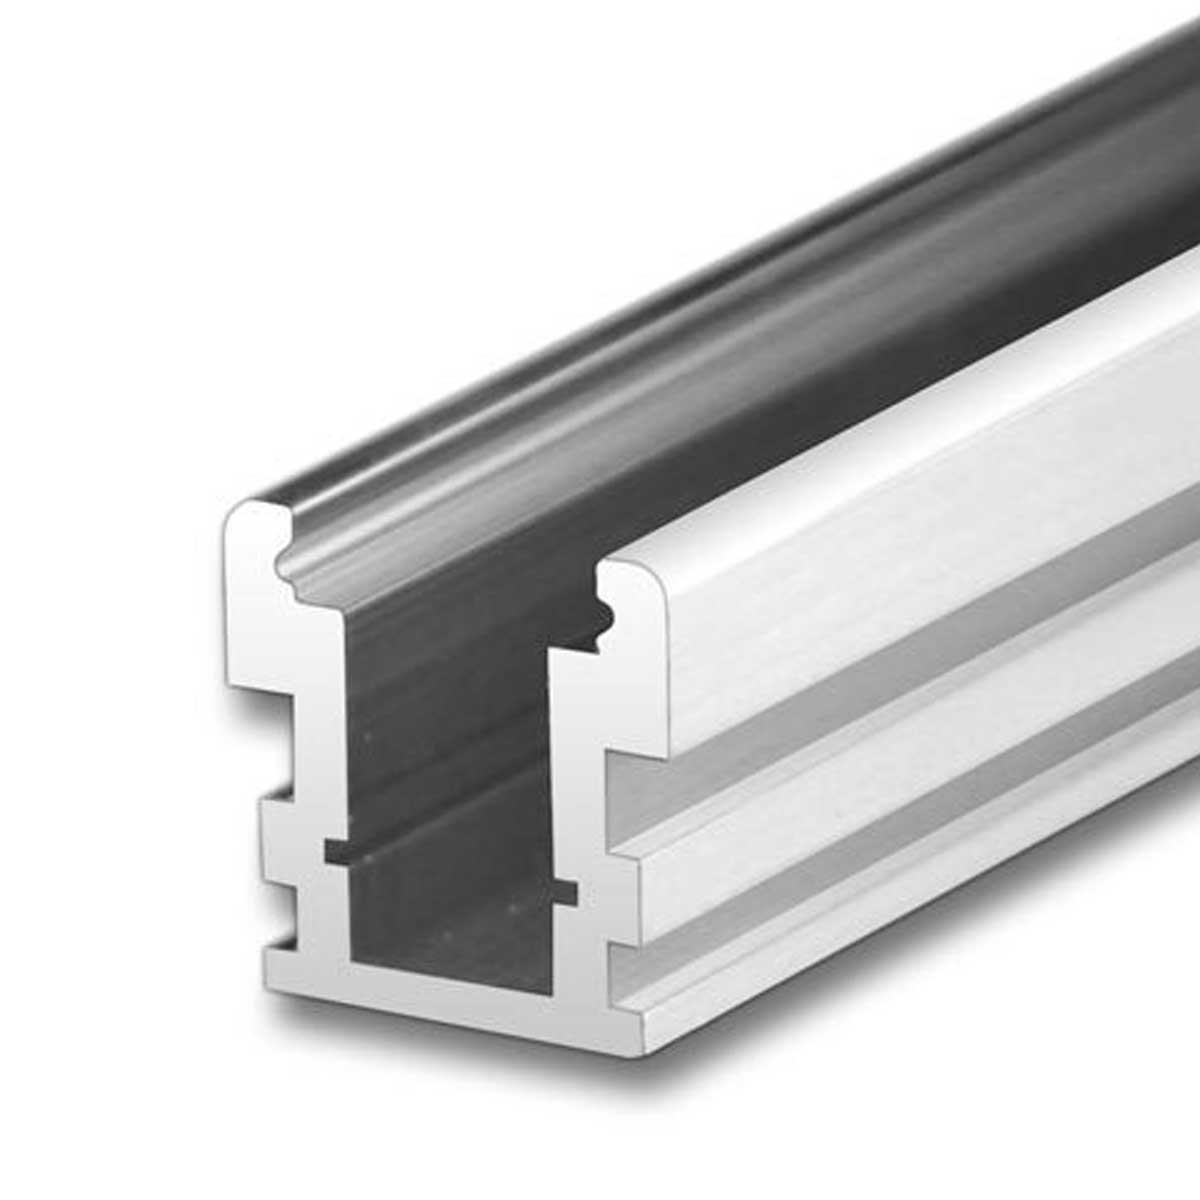 1000 Aluminium Slotted Channel Manufacturers, Suppliers in Jind